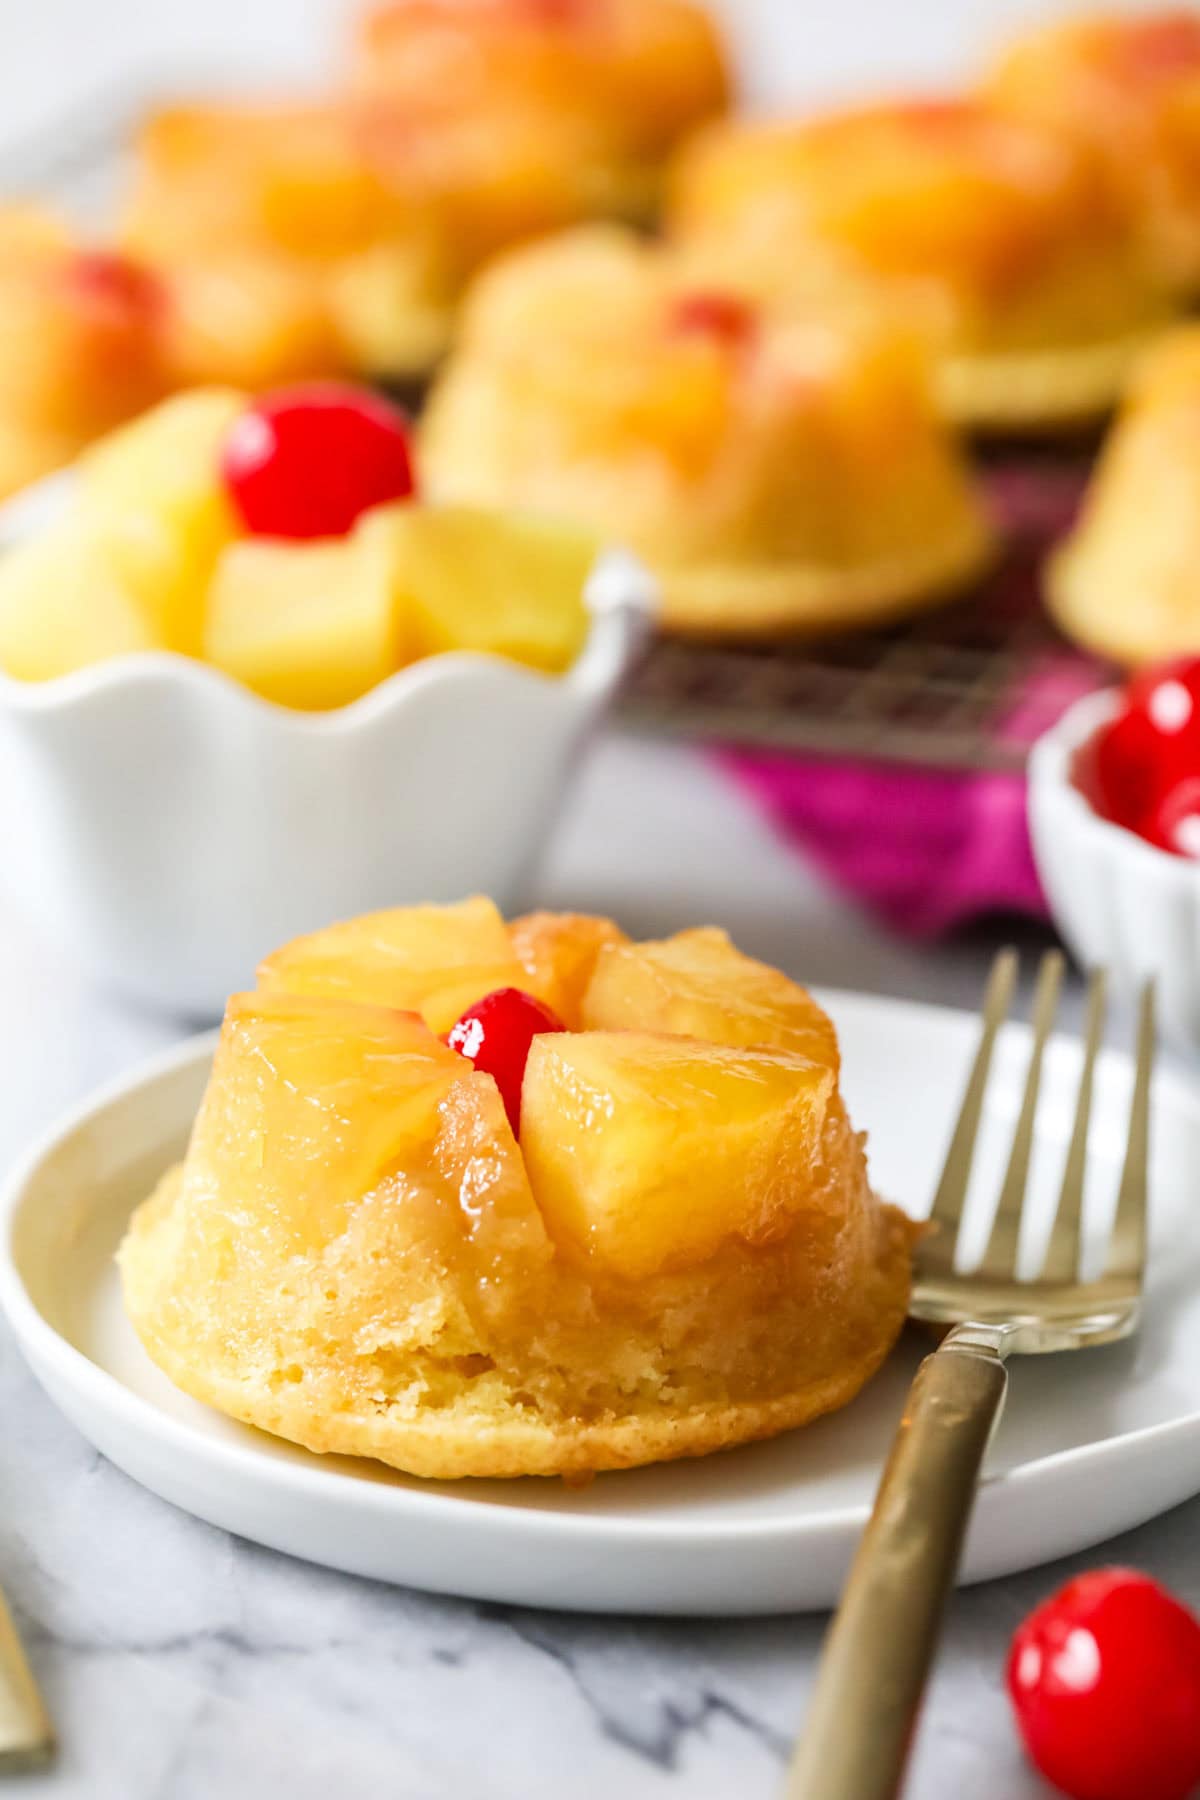 Pineapple upside down cupcake on a plate with a fork.